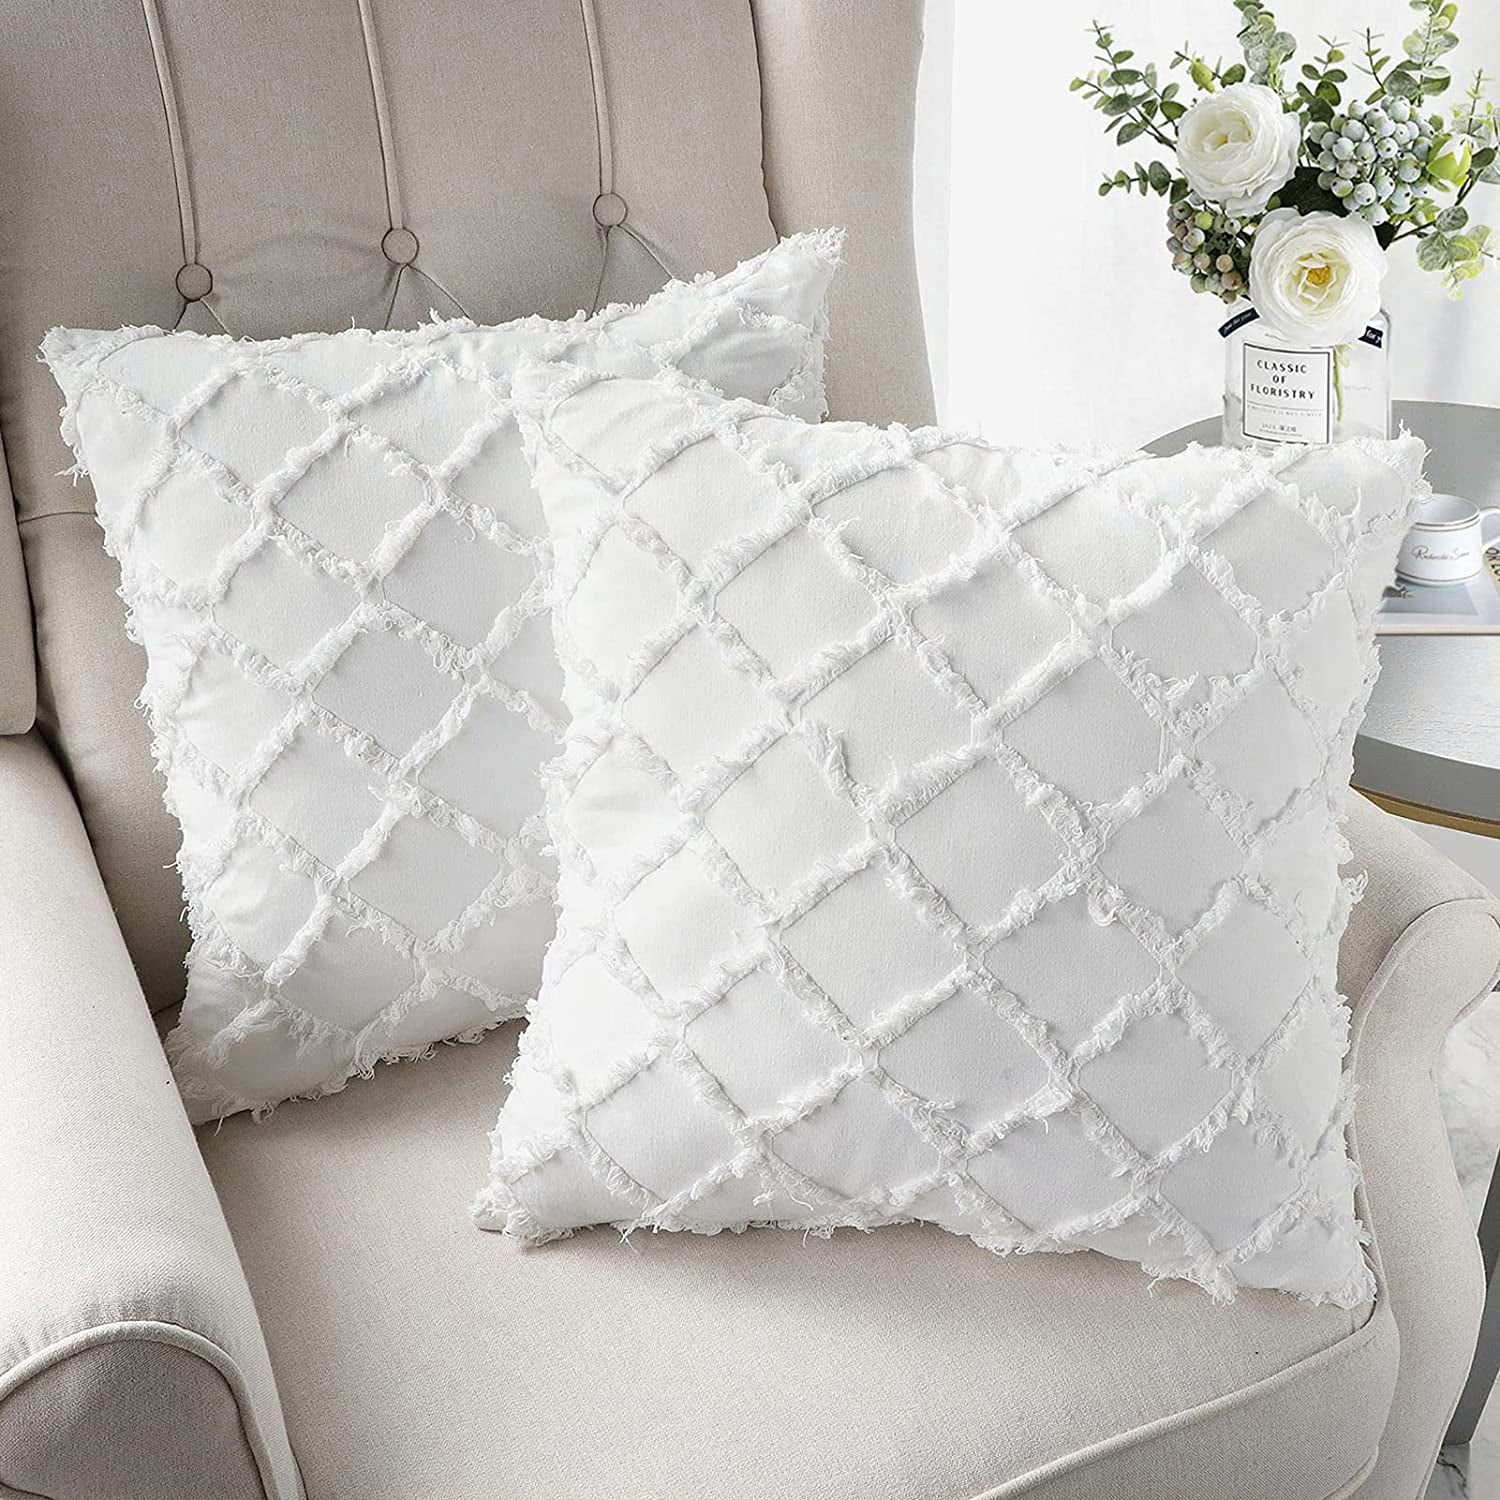 Throw Pillow Covers For Couch 18x18 Set Of 2 White 